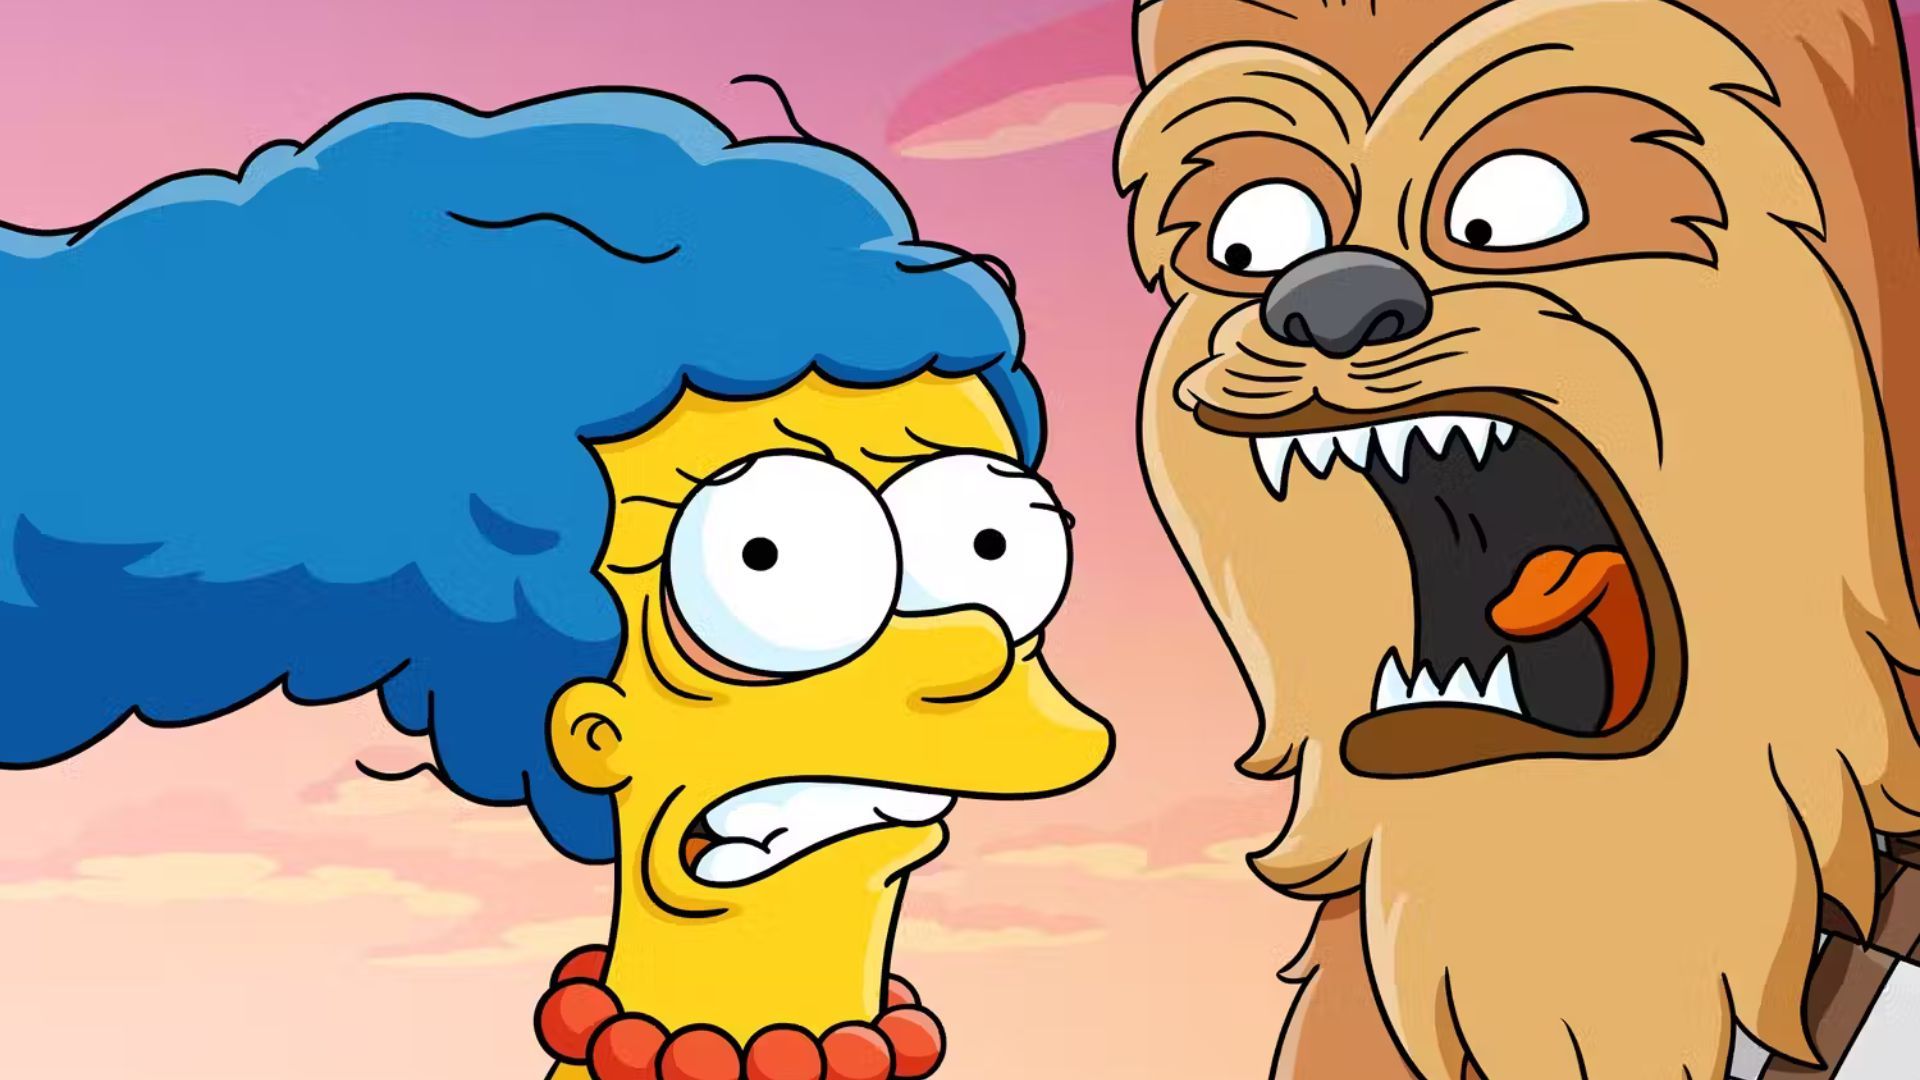 The Simpsons and Star Wars Team Up for a Mother’s Day Adventure